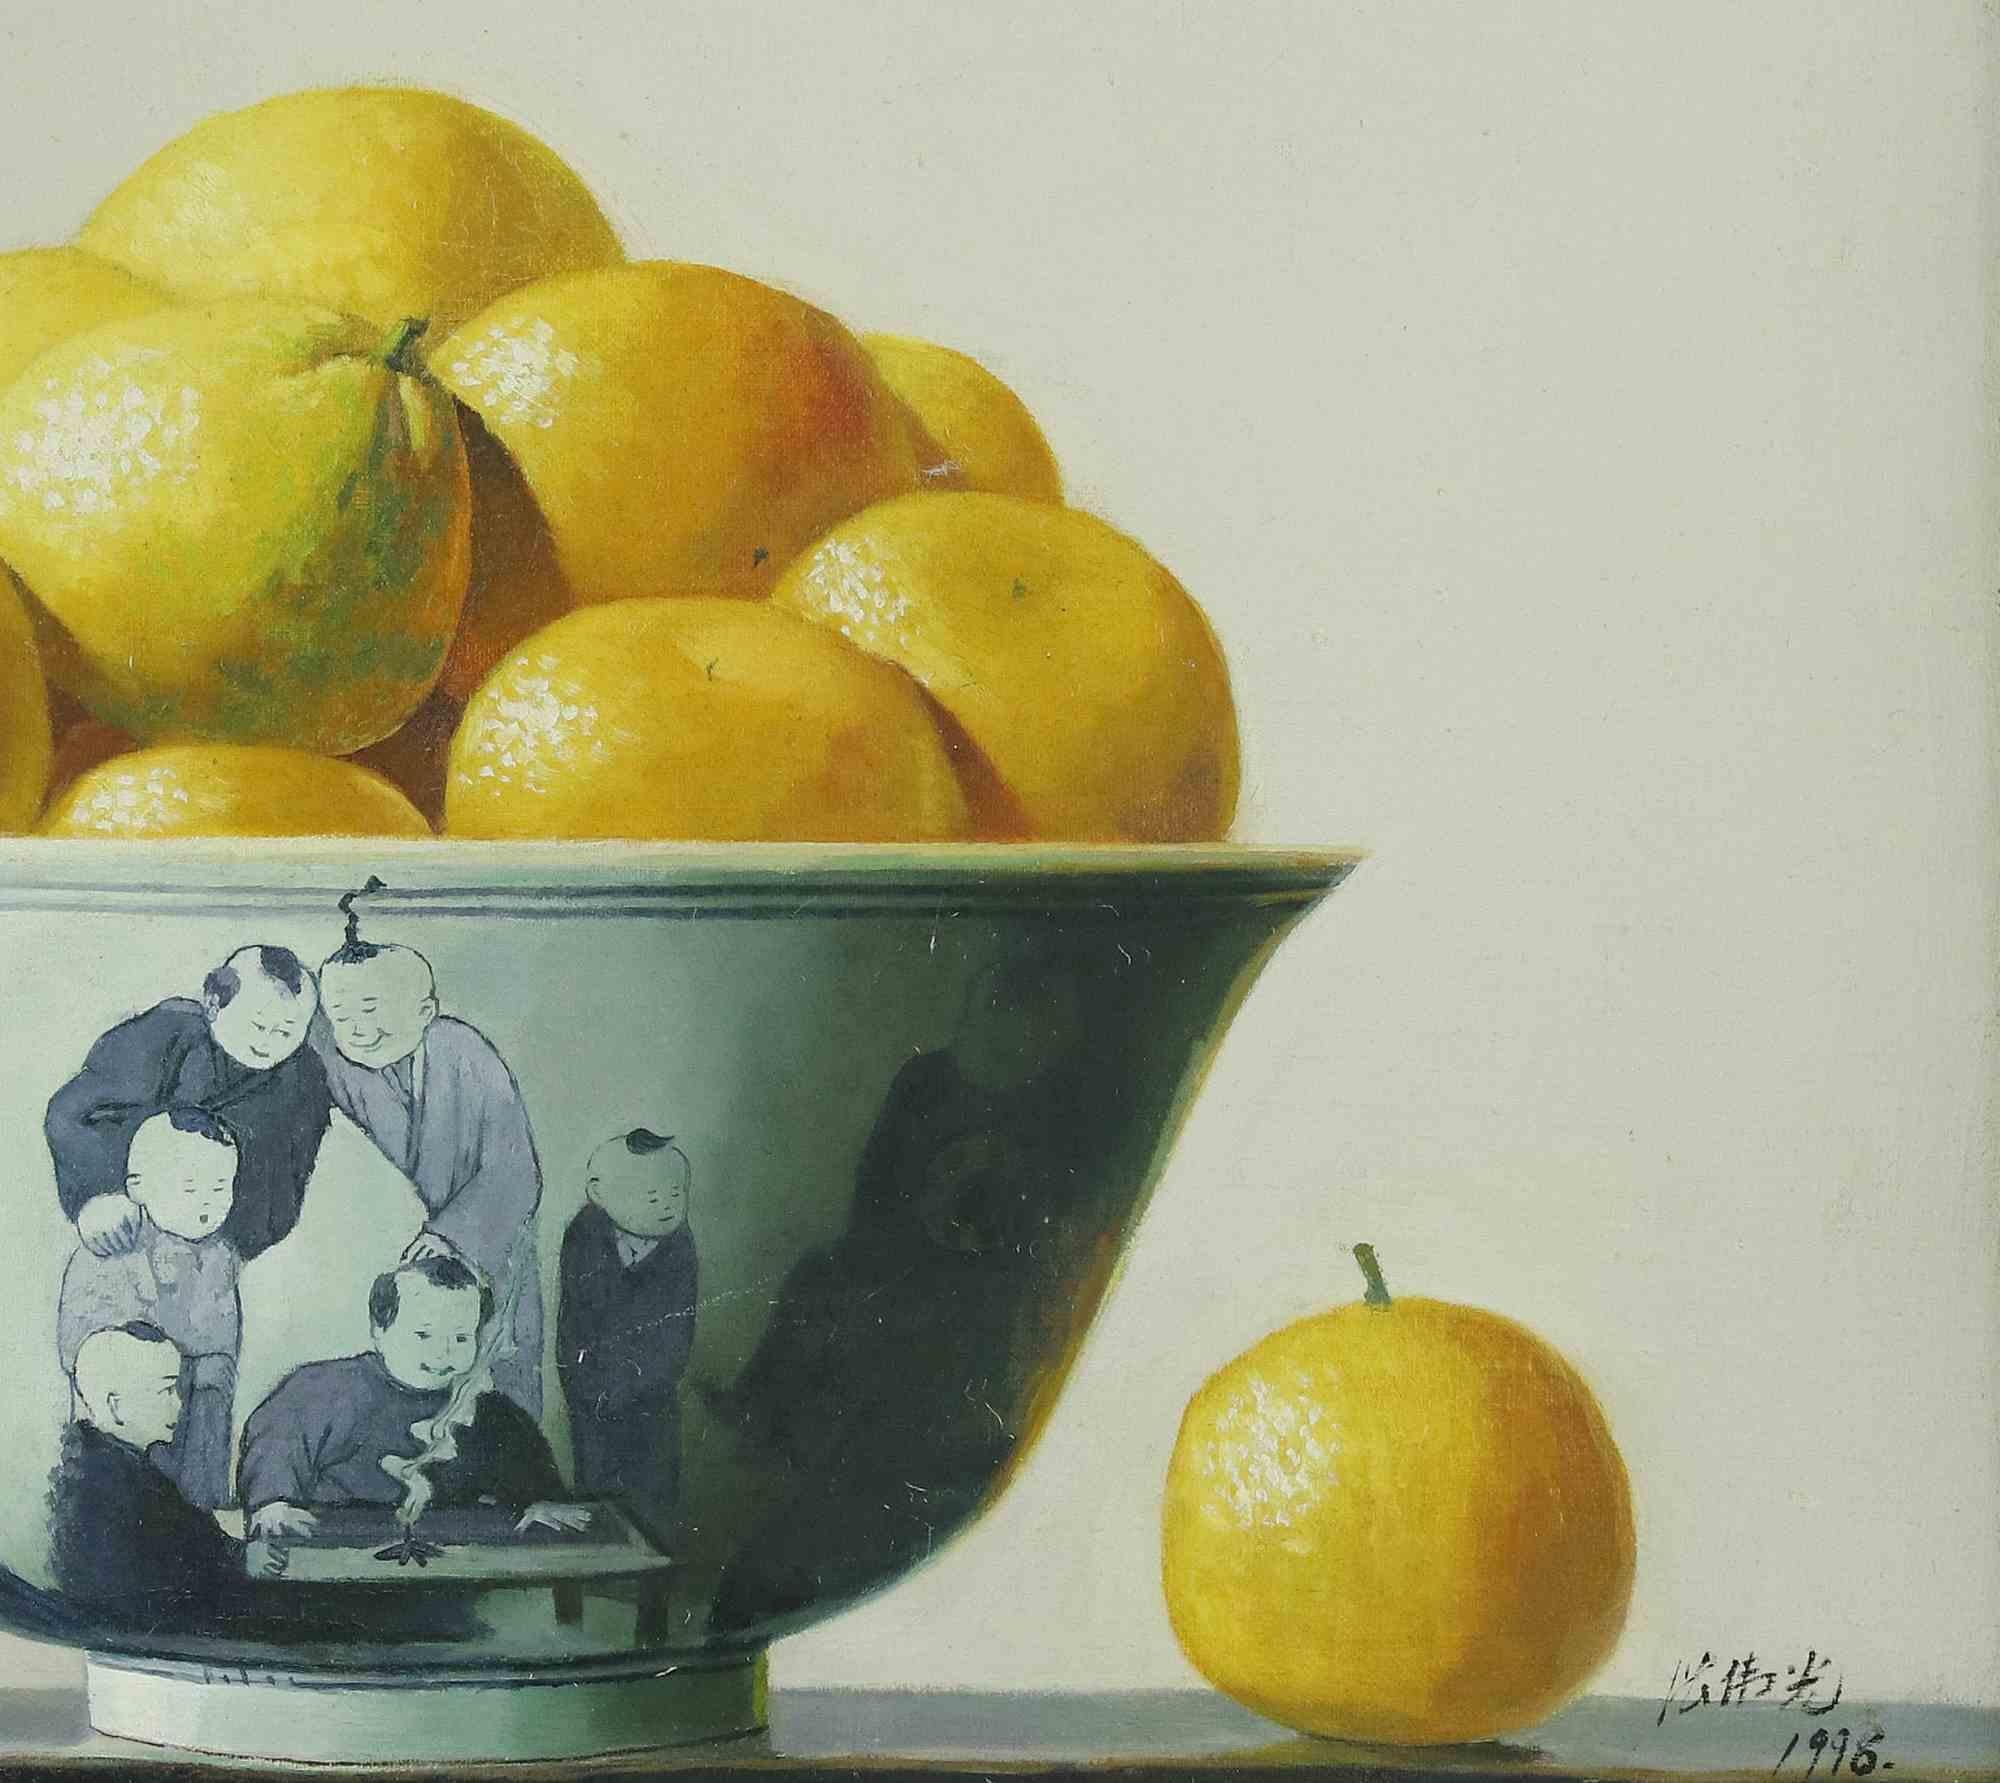 Oranges in a Bowl is an original oil painting realized in 1998 by Zhang Wei Guang (Mirror).

Mixed colored oil painting

Includes frame

Hand-signed and dated on the lower right corner.

Good conditions.

Zhang Wei Guang , also called ‘mirror' was